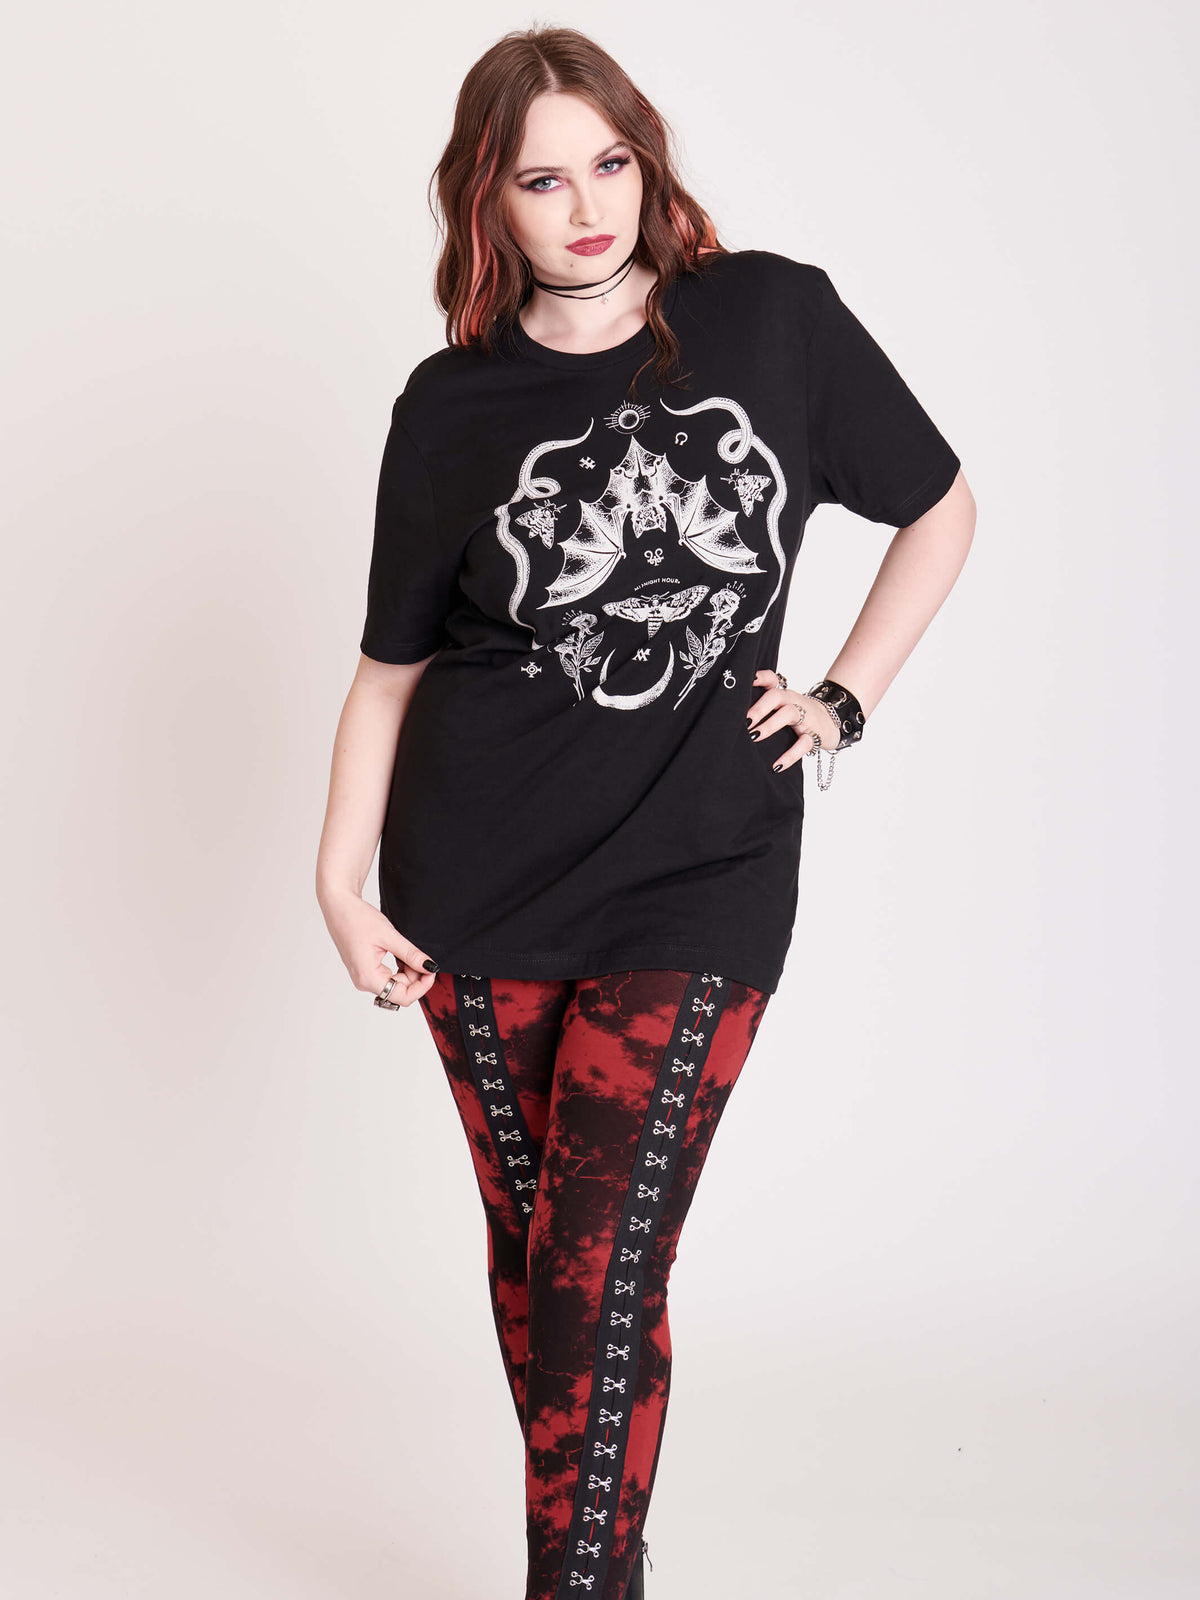  unisex t-shirt with snakes, bats and deathmoth. 